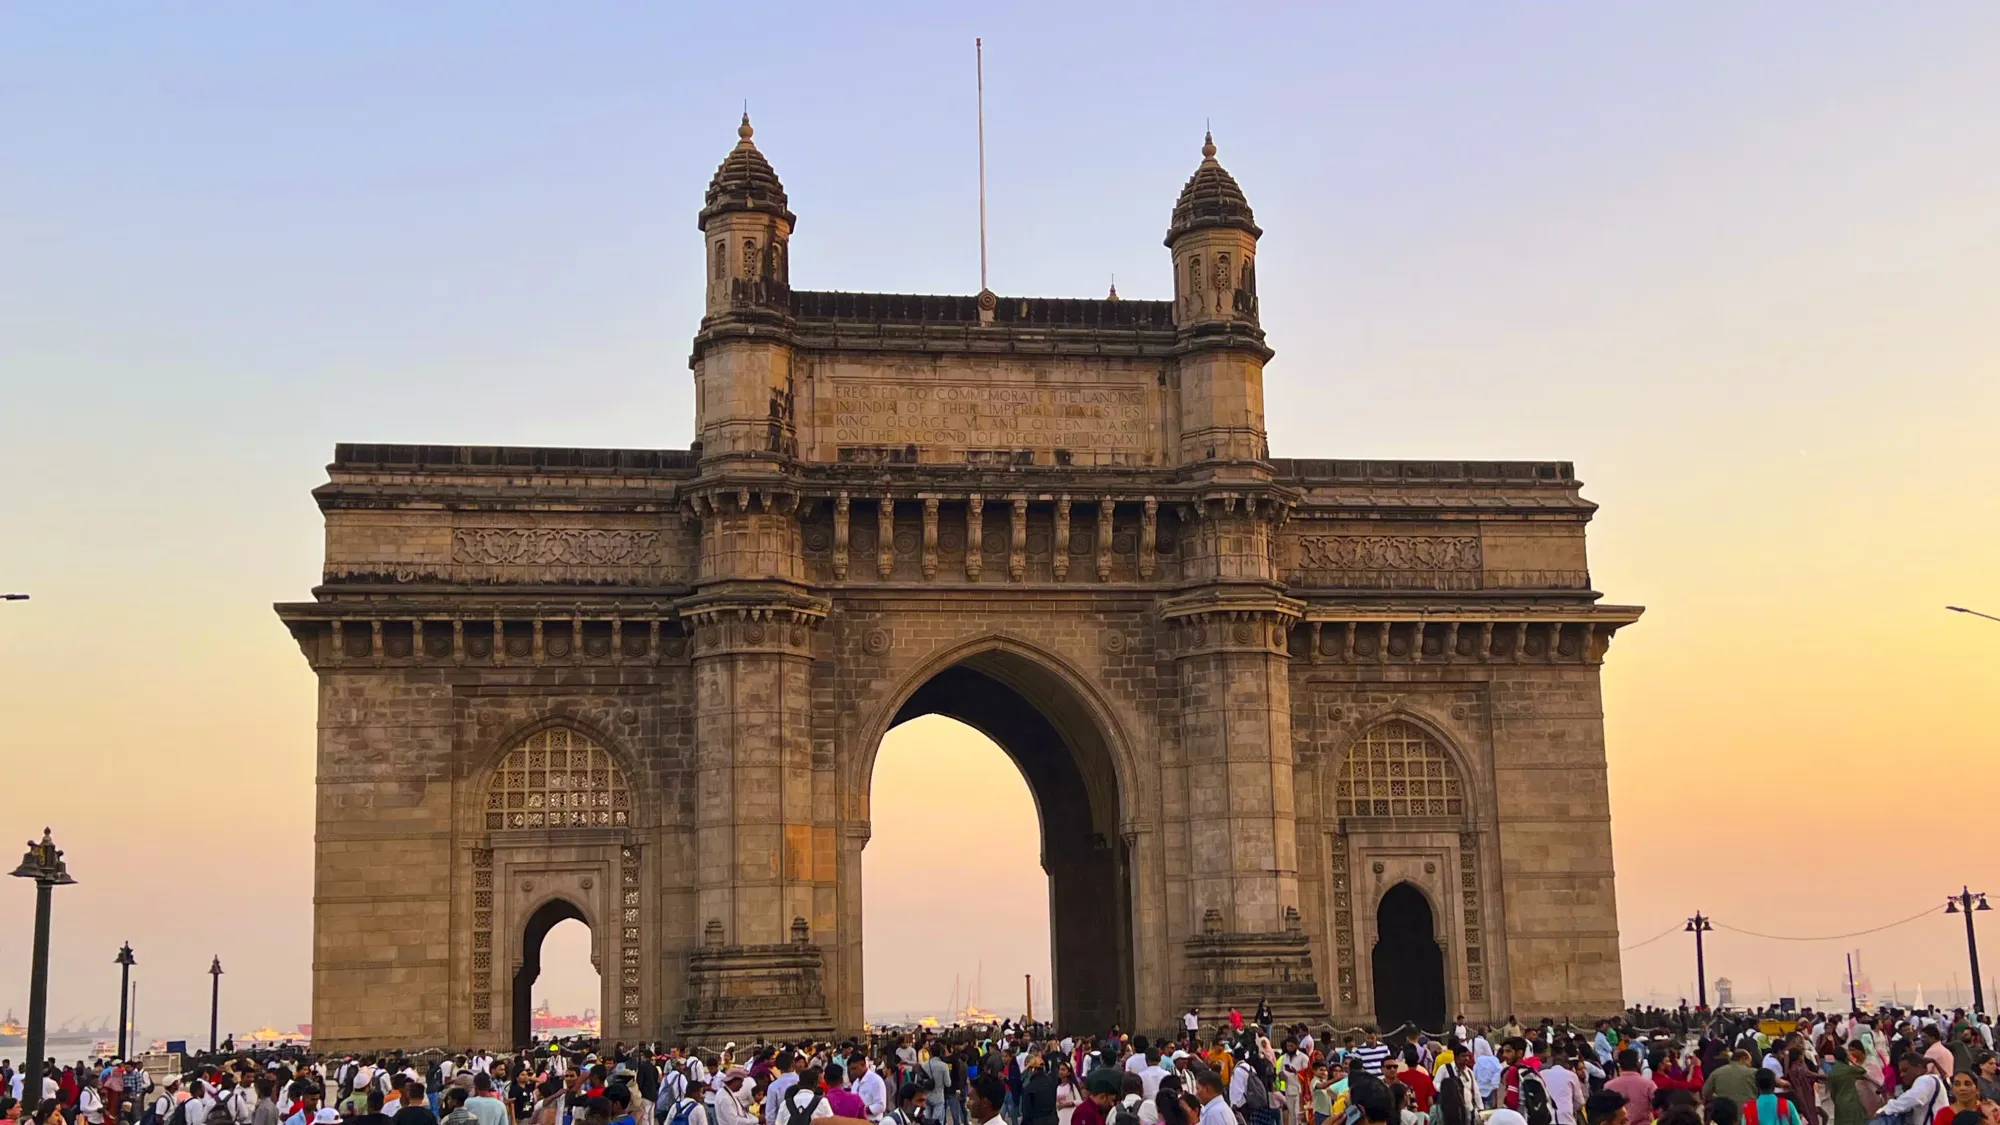 Three arches comprising the Gateway to India with many tourists standing in front of it